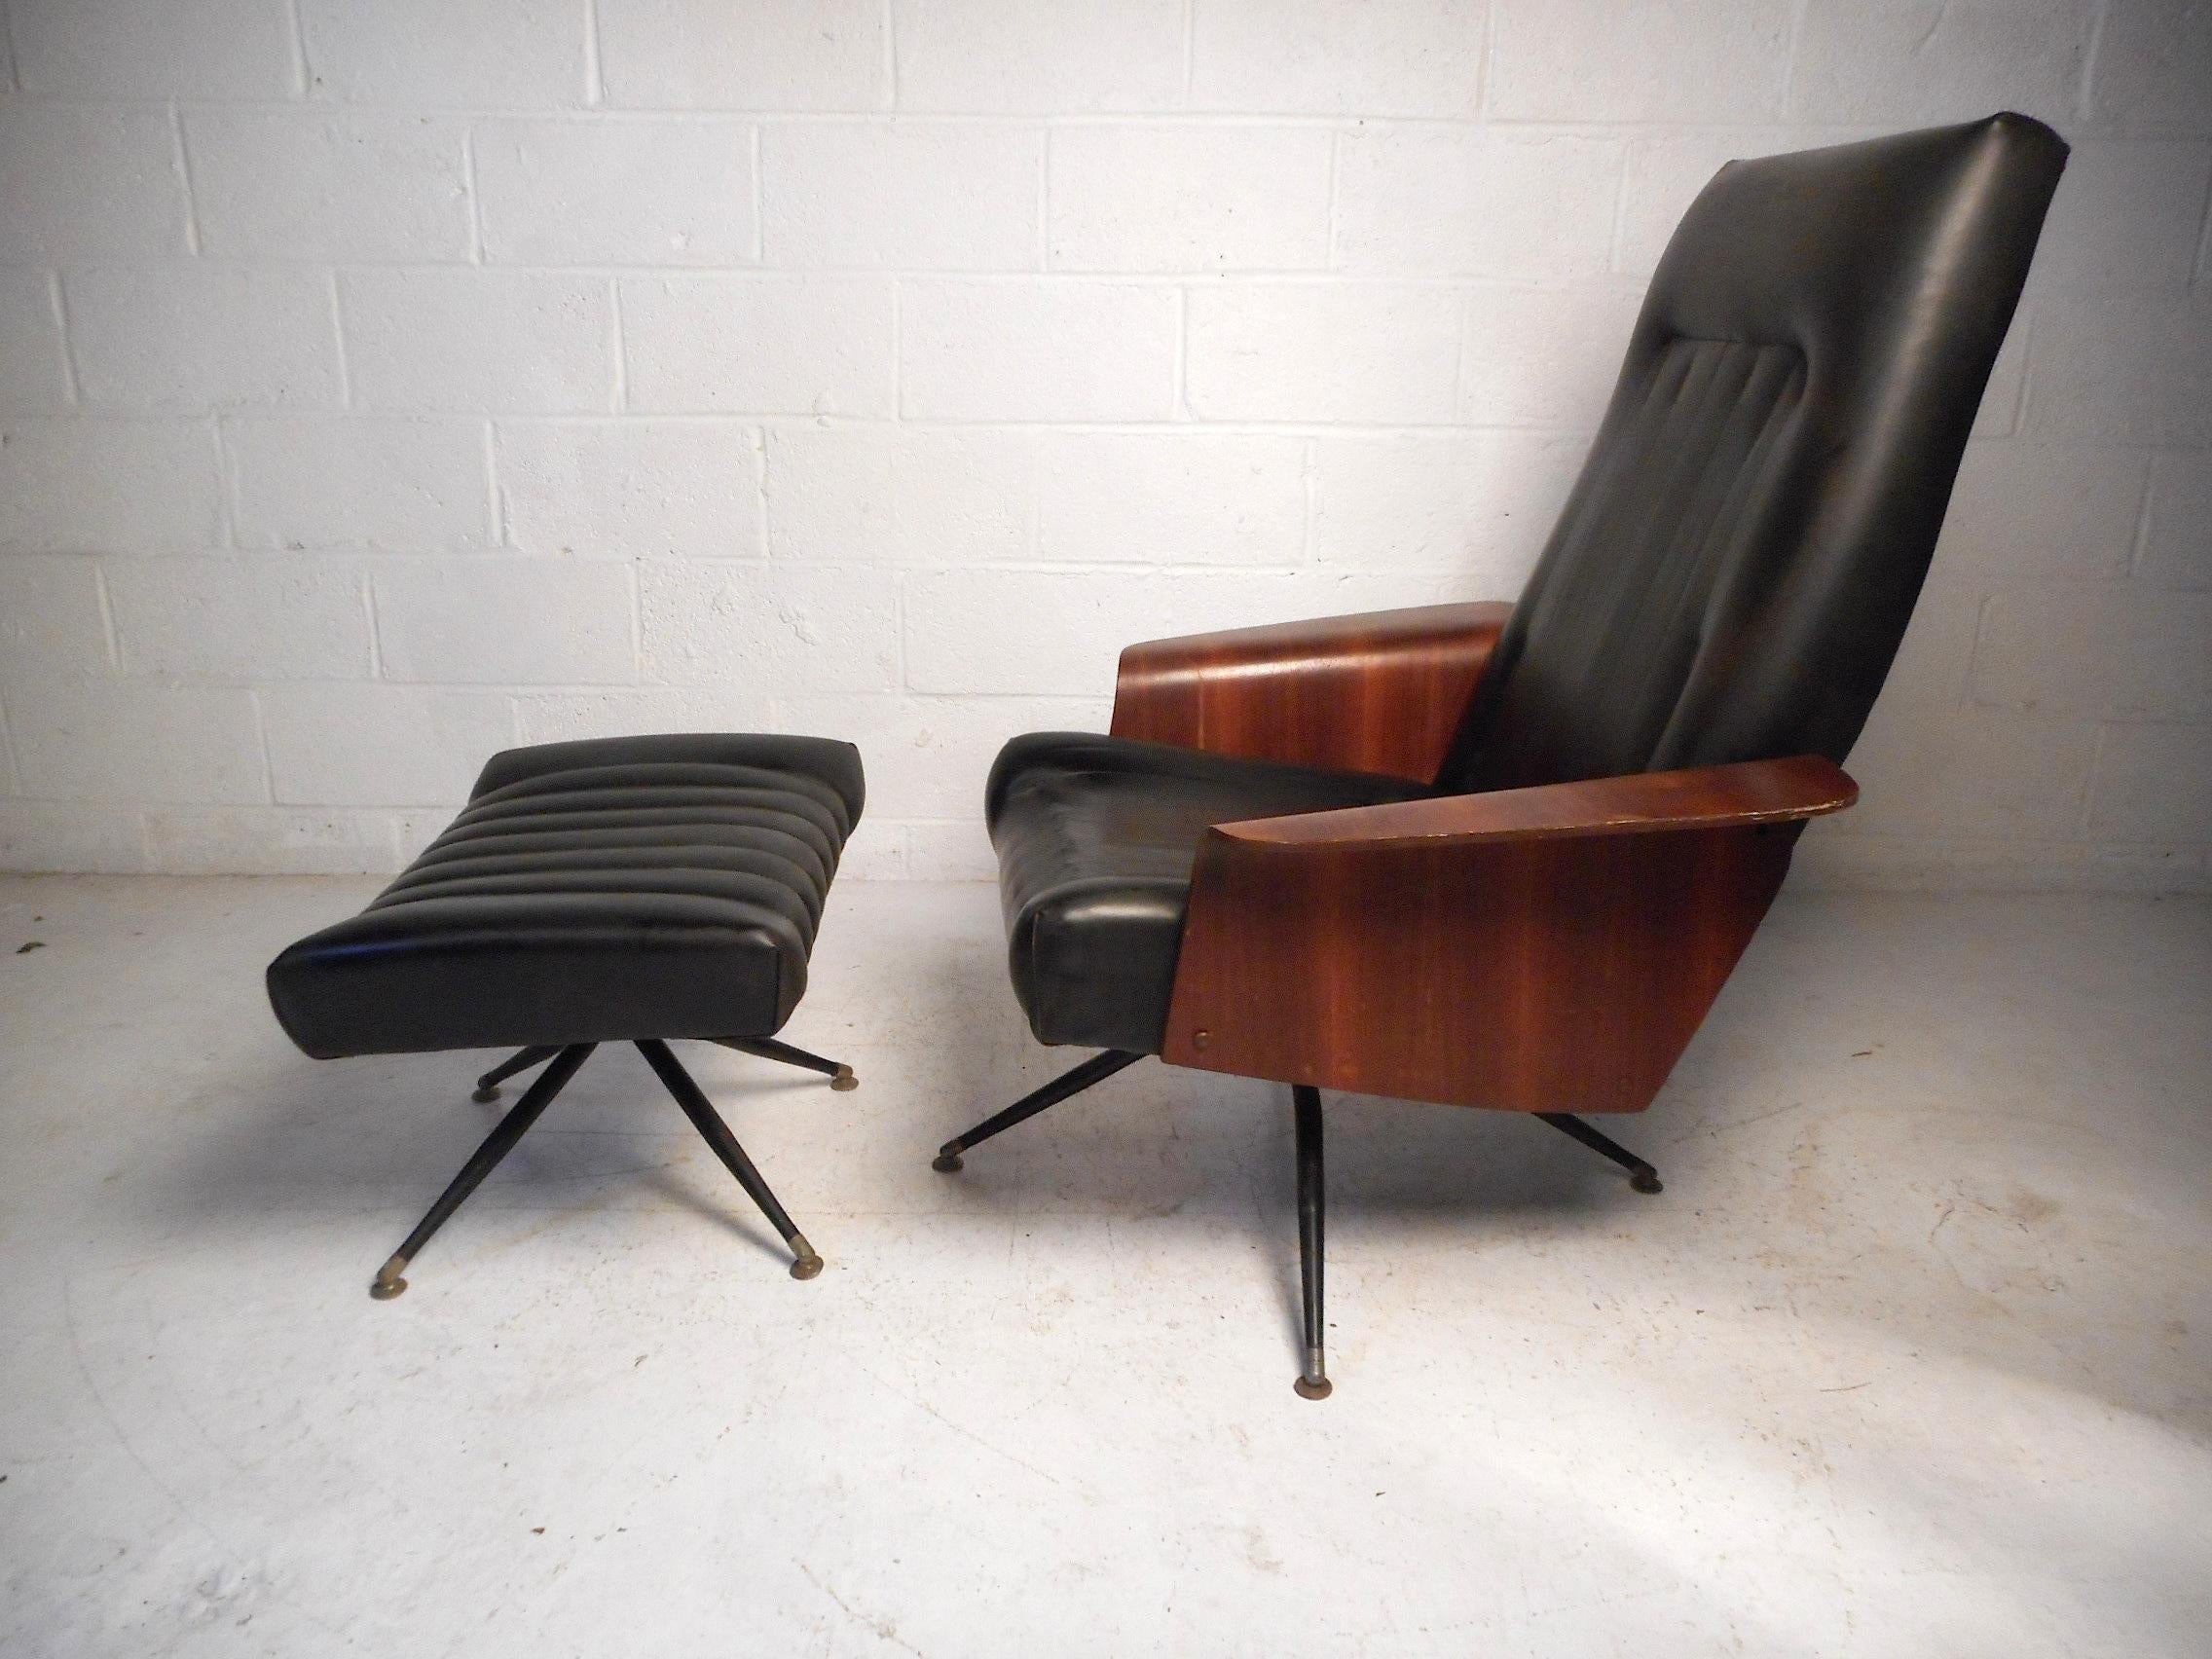 This stylish midcentury lounge chair and ottoman feature black faux-leather upholstery, molded plywood armrests, and swivelling bases on both the chair and ottoman. This set is sure to provide a great addition to any modern interior. Please confirm